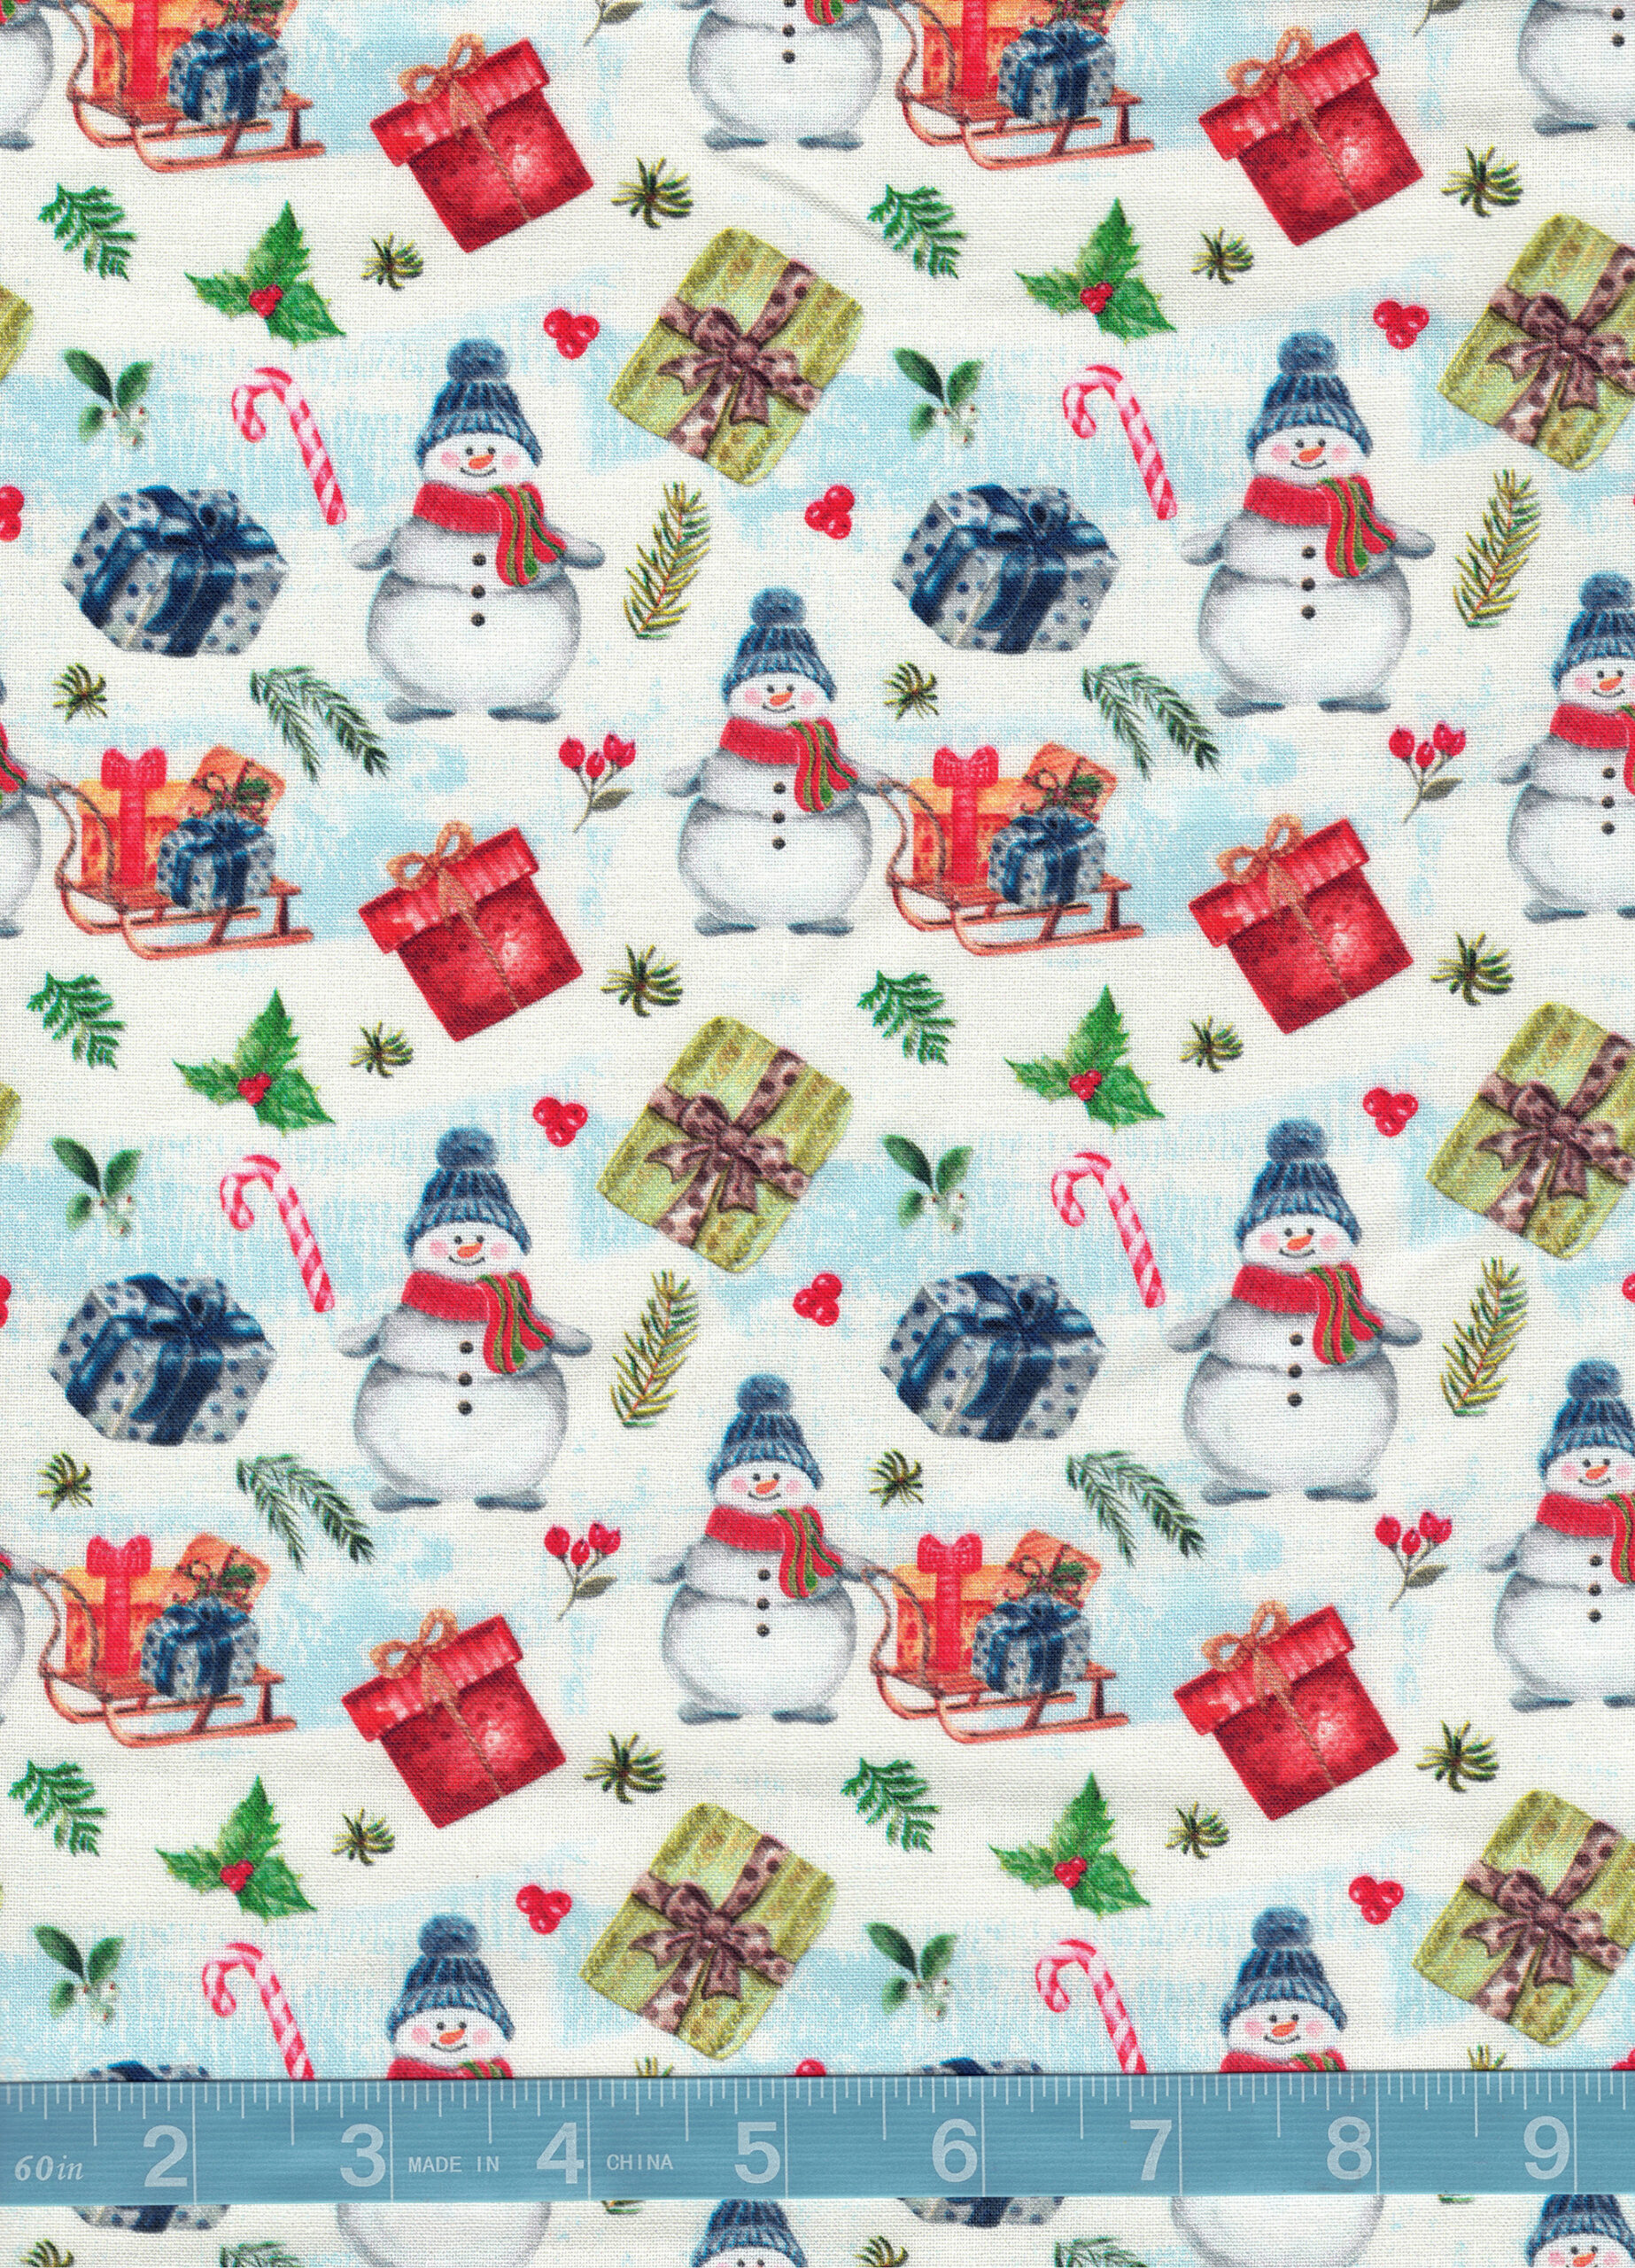 Christmas Snowman Delivers Presents Quilt Cotton Fabric By The Yard -  Merchlet